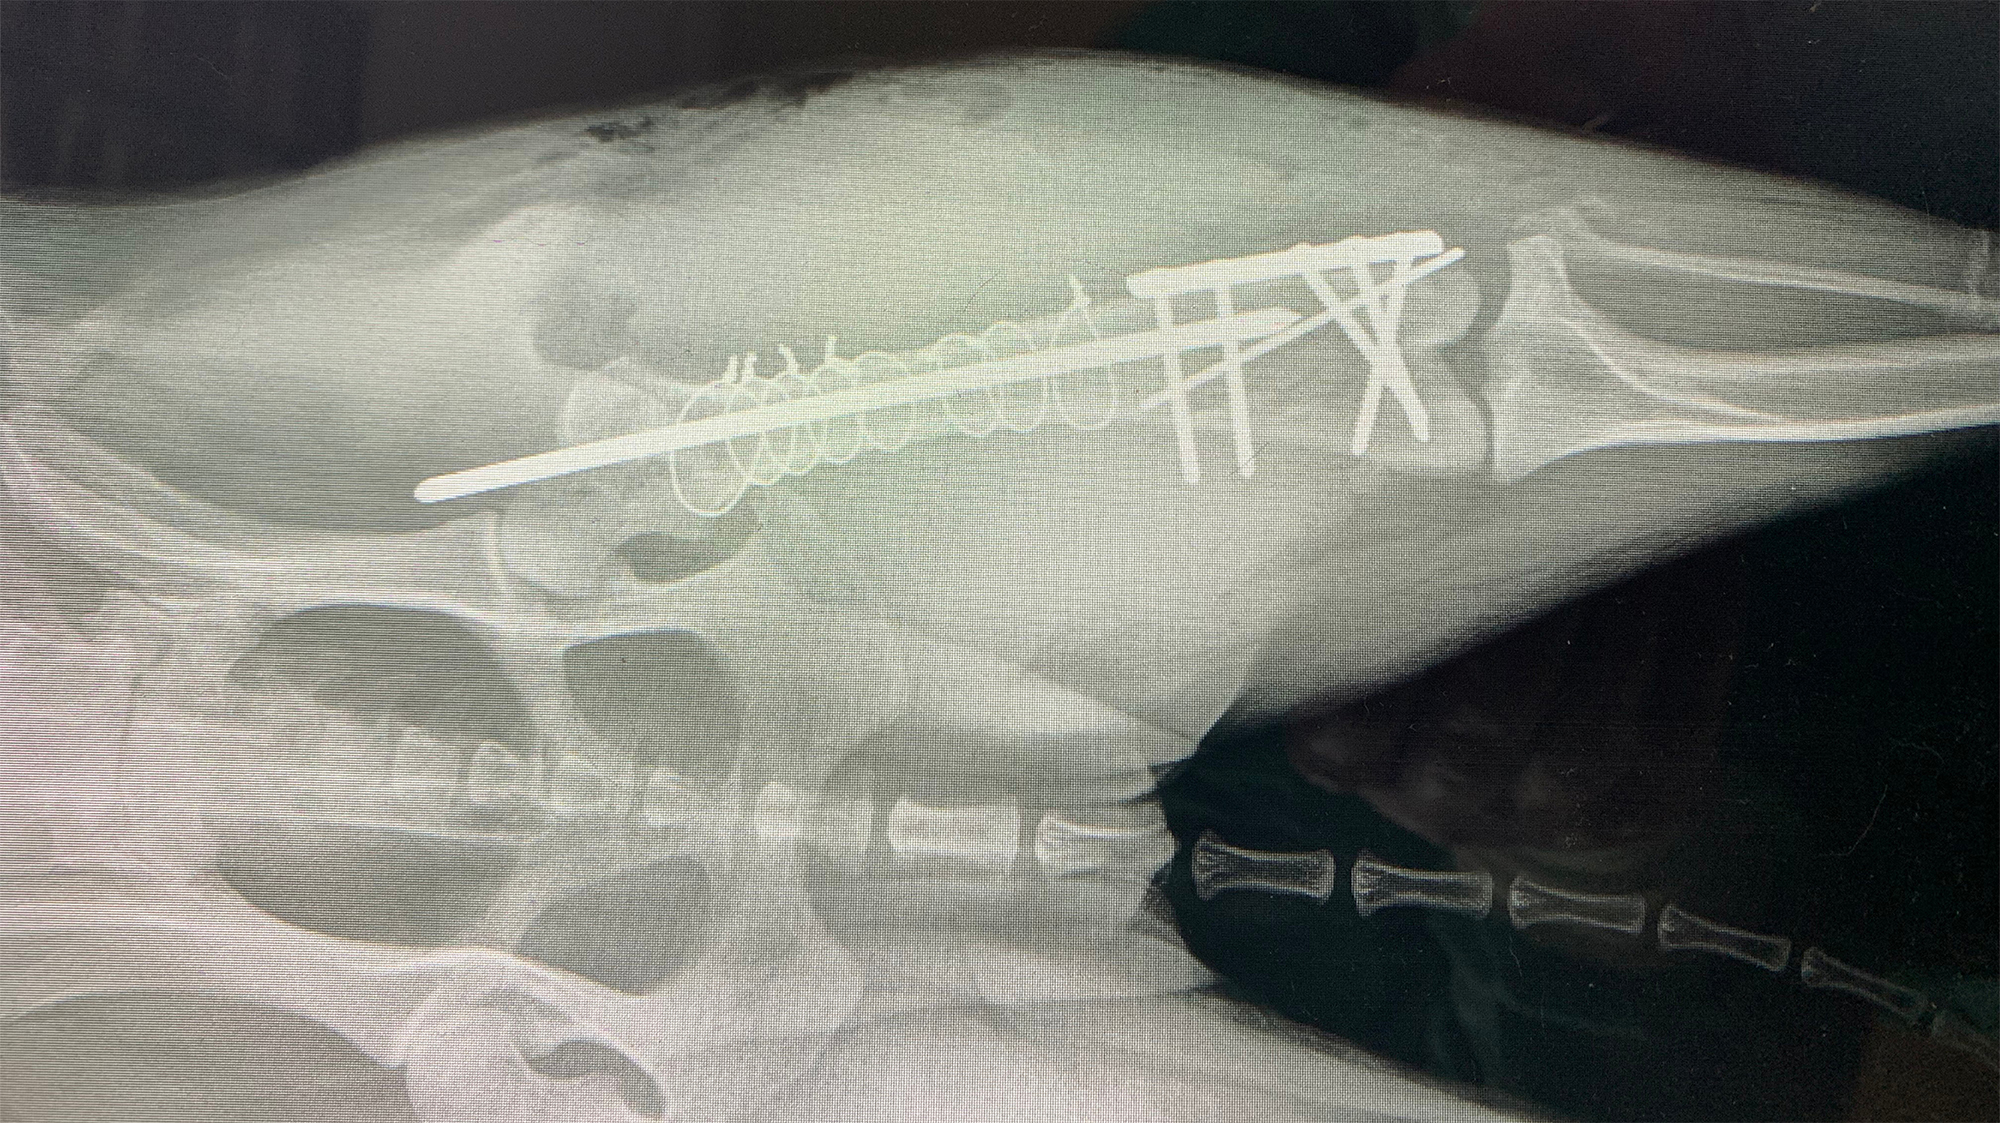 Chevy the dog's repaired leg x-ray